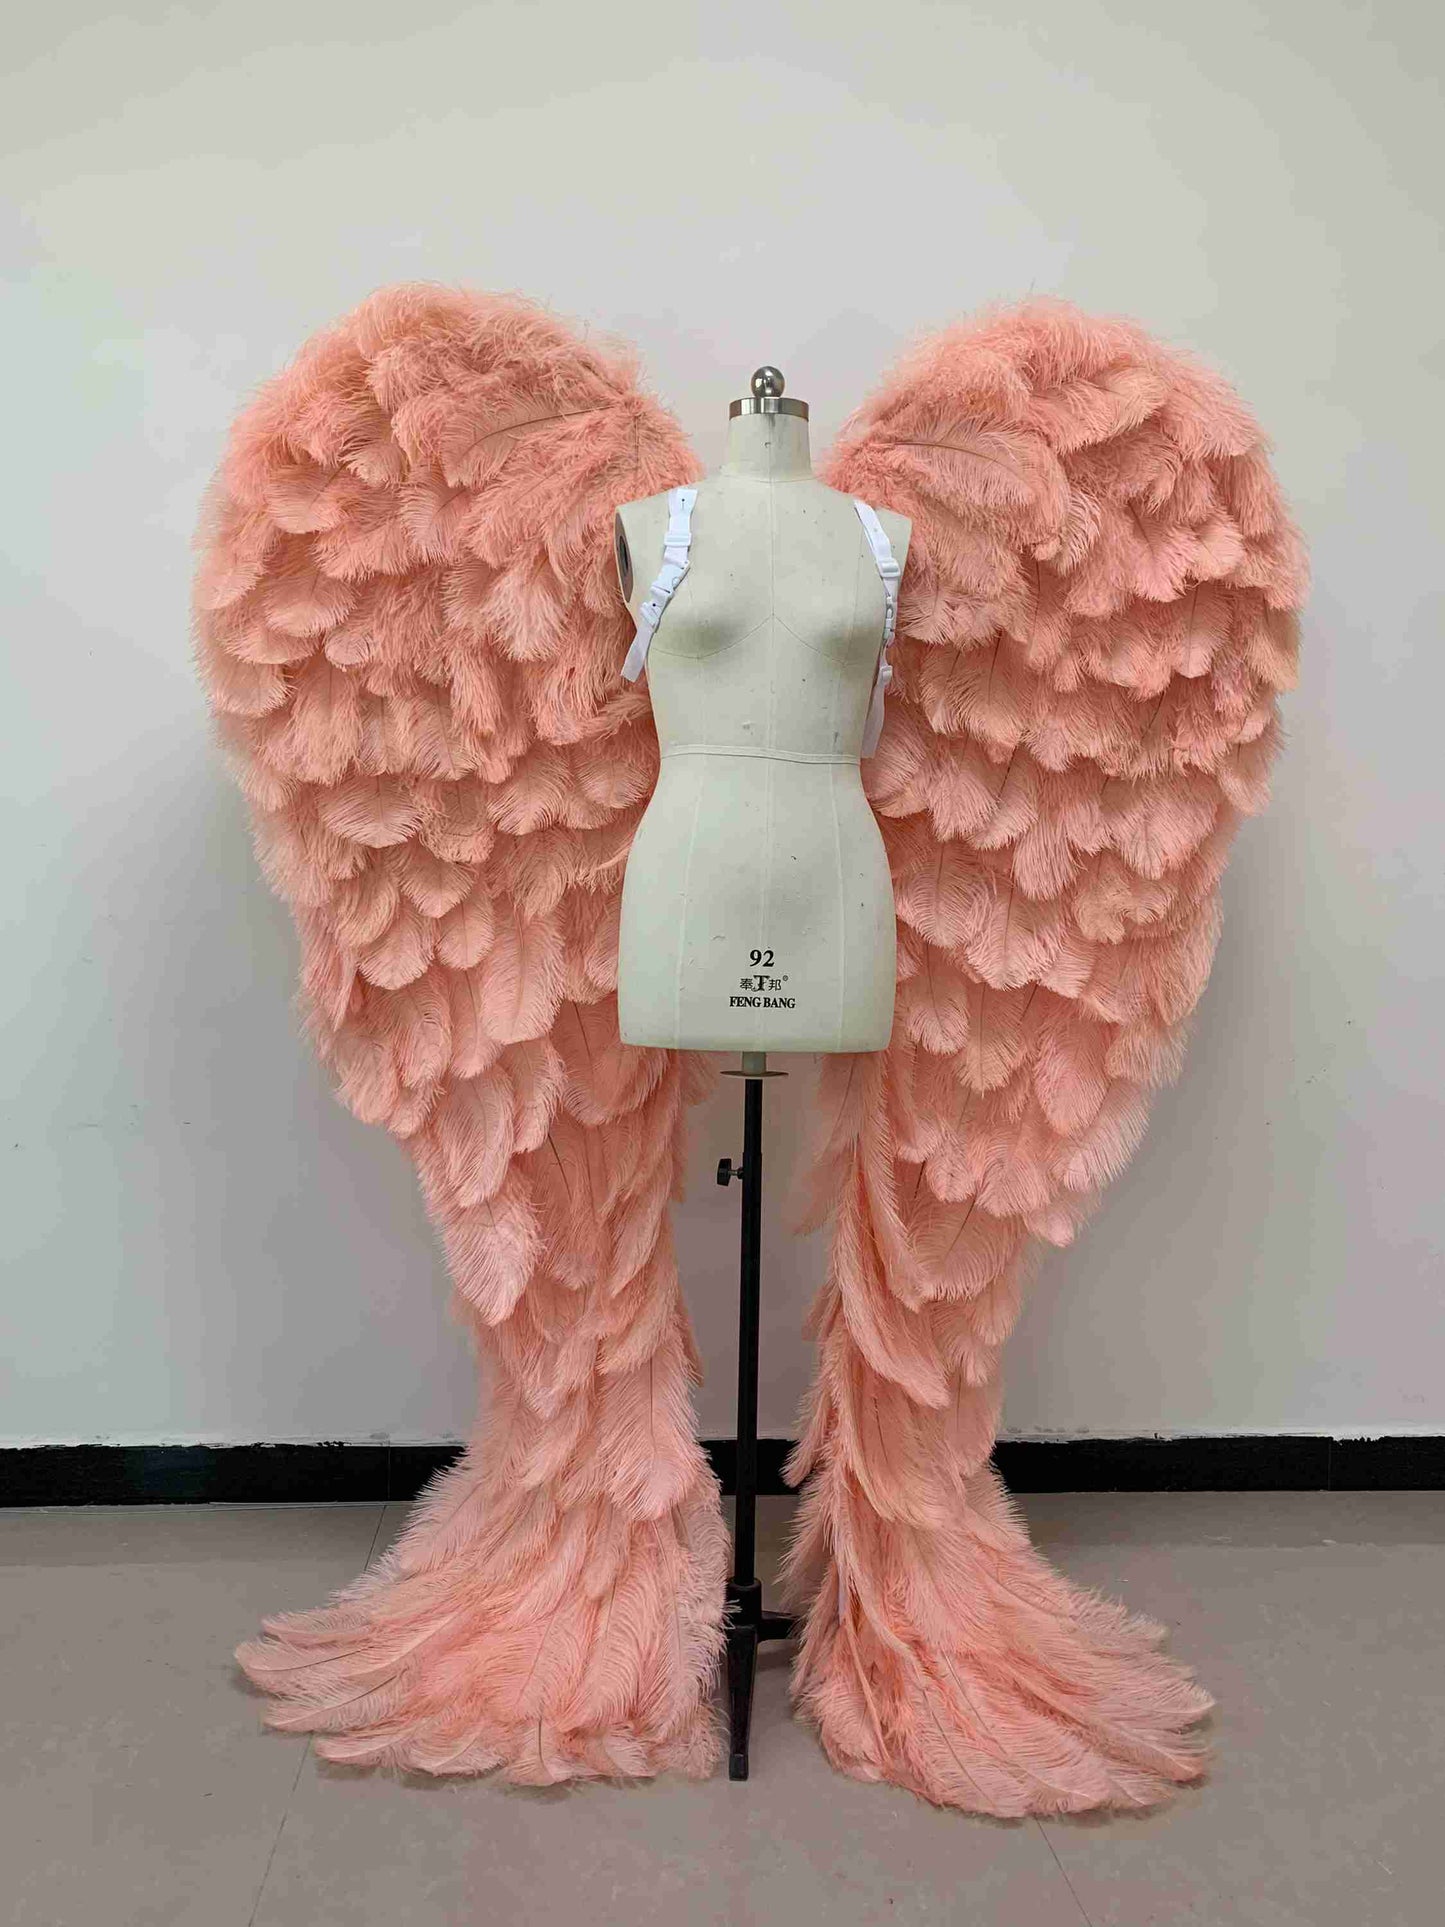 Our luxury pink angel wings from the front. Made from ostrich feathers. Wings for angel costume. Suitable for photoshoots especially for boudoirs.